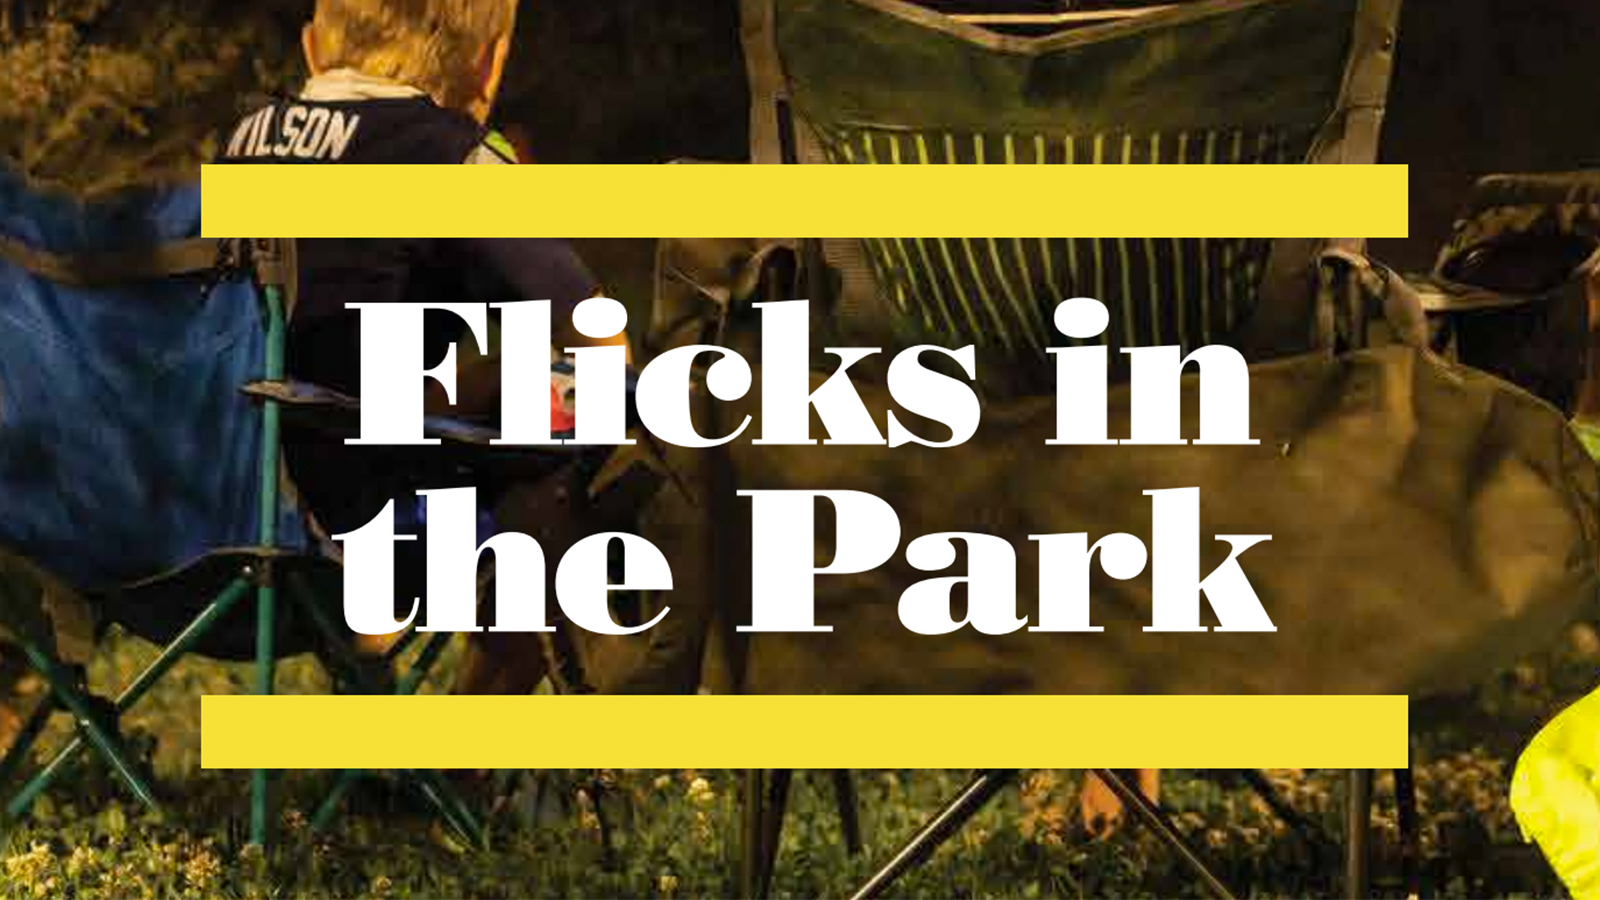 Flicks in the Park text against an image of people in lawn chairs in the park at night.